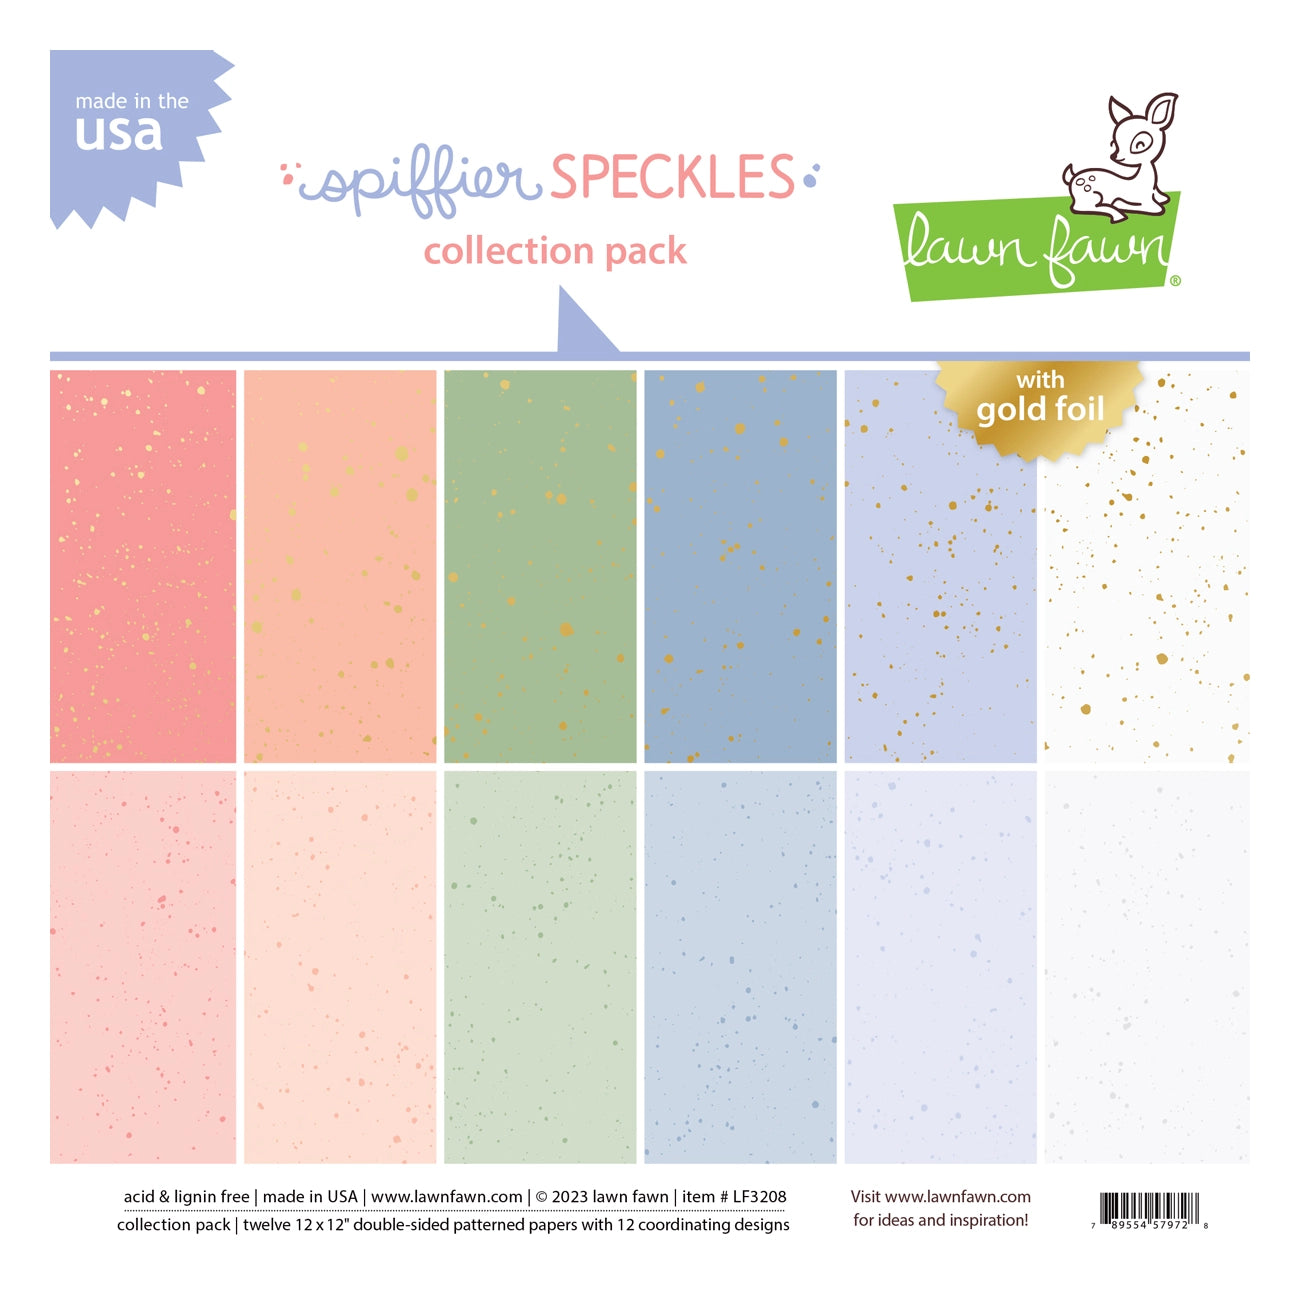 Paper Pack | Sunkissed LEDGER 12x12 (single-sided)